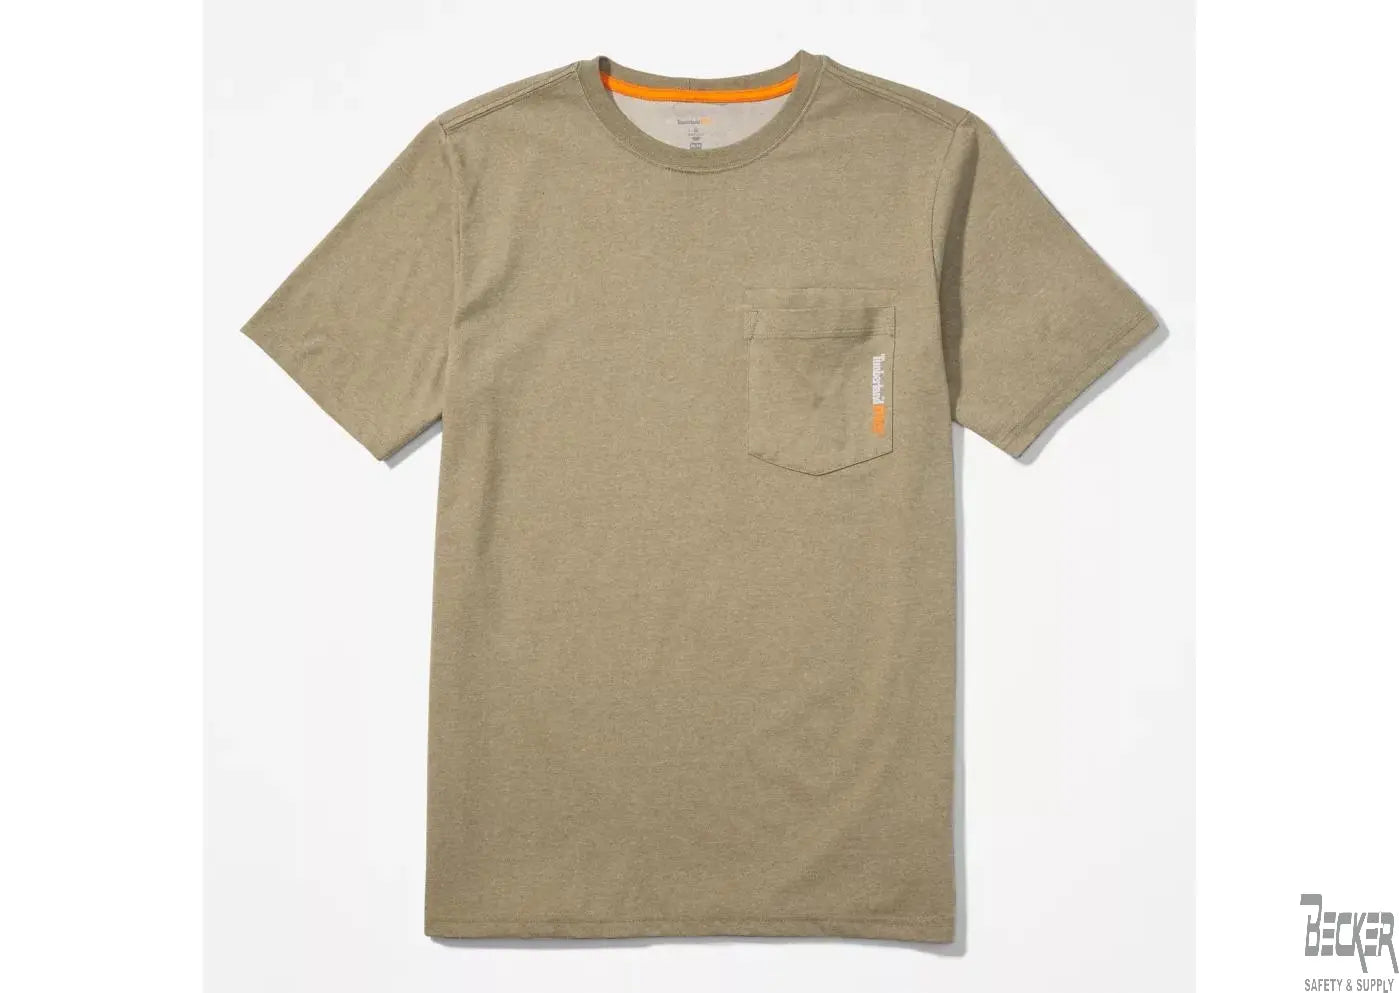 TIMBERLAND PRO - Base Plate Short Sleeve T-Shirt, Burnt Olive - Becker Safety and Supply